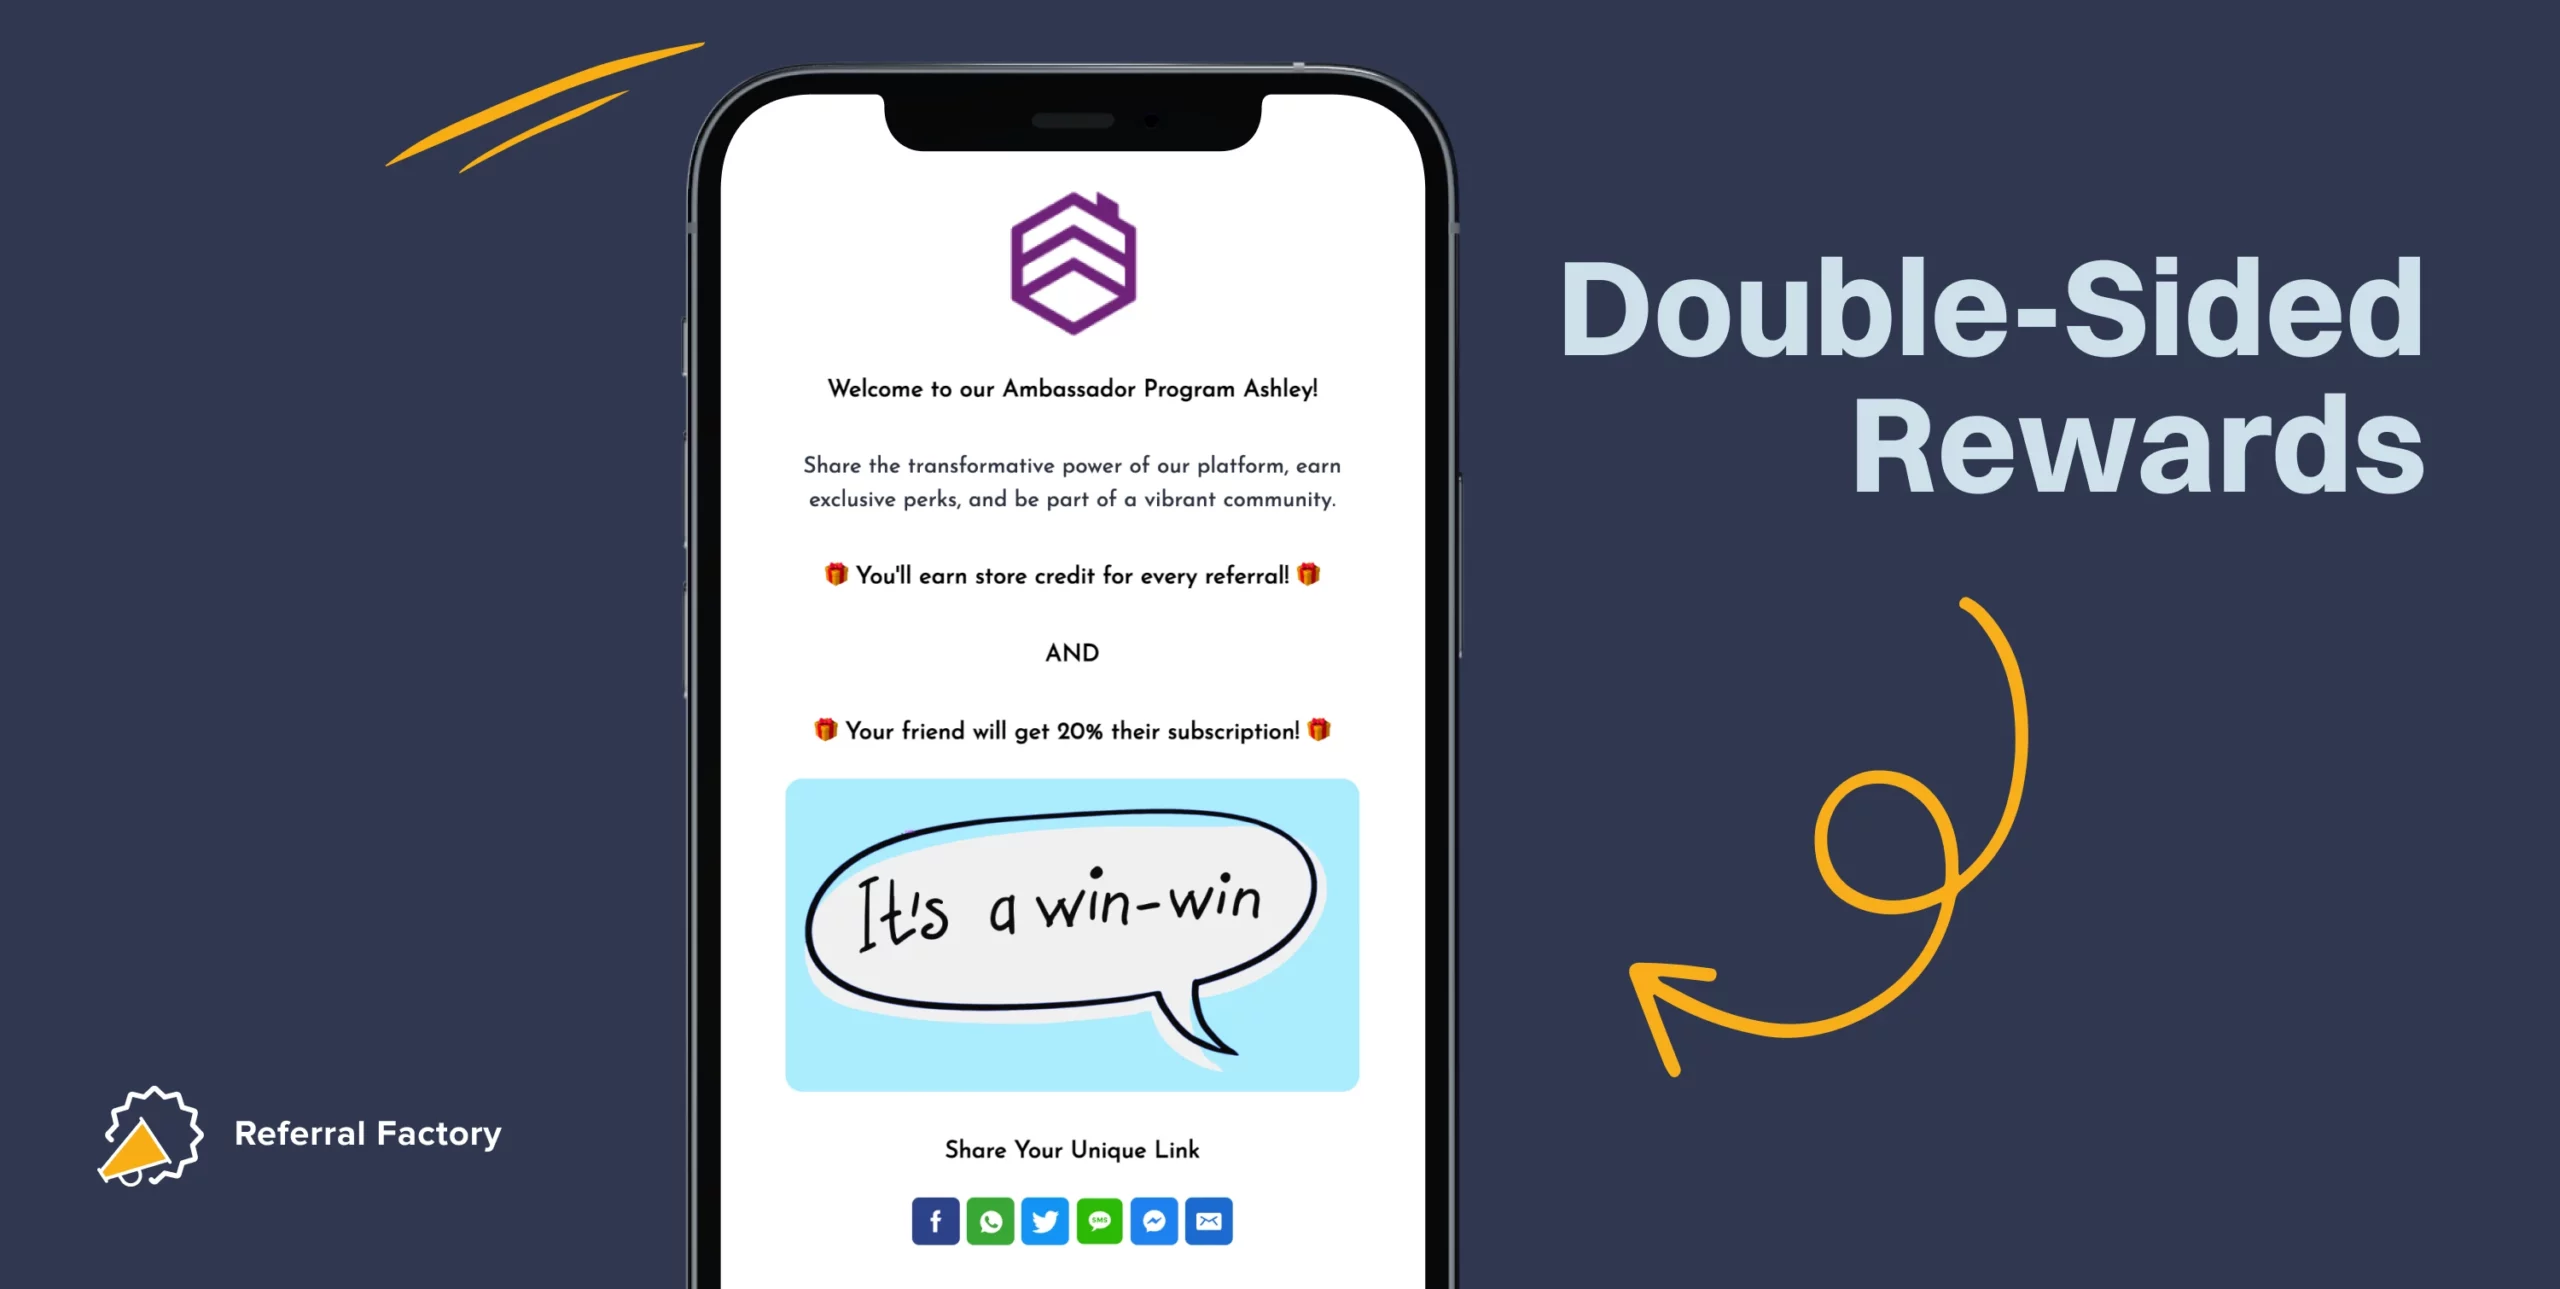 double sided referral program rewards win win reward referrer and friend incentives referral factory